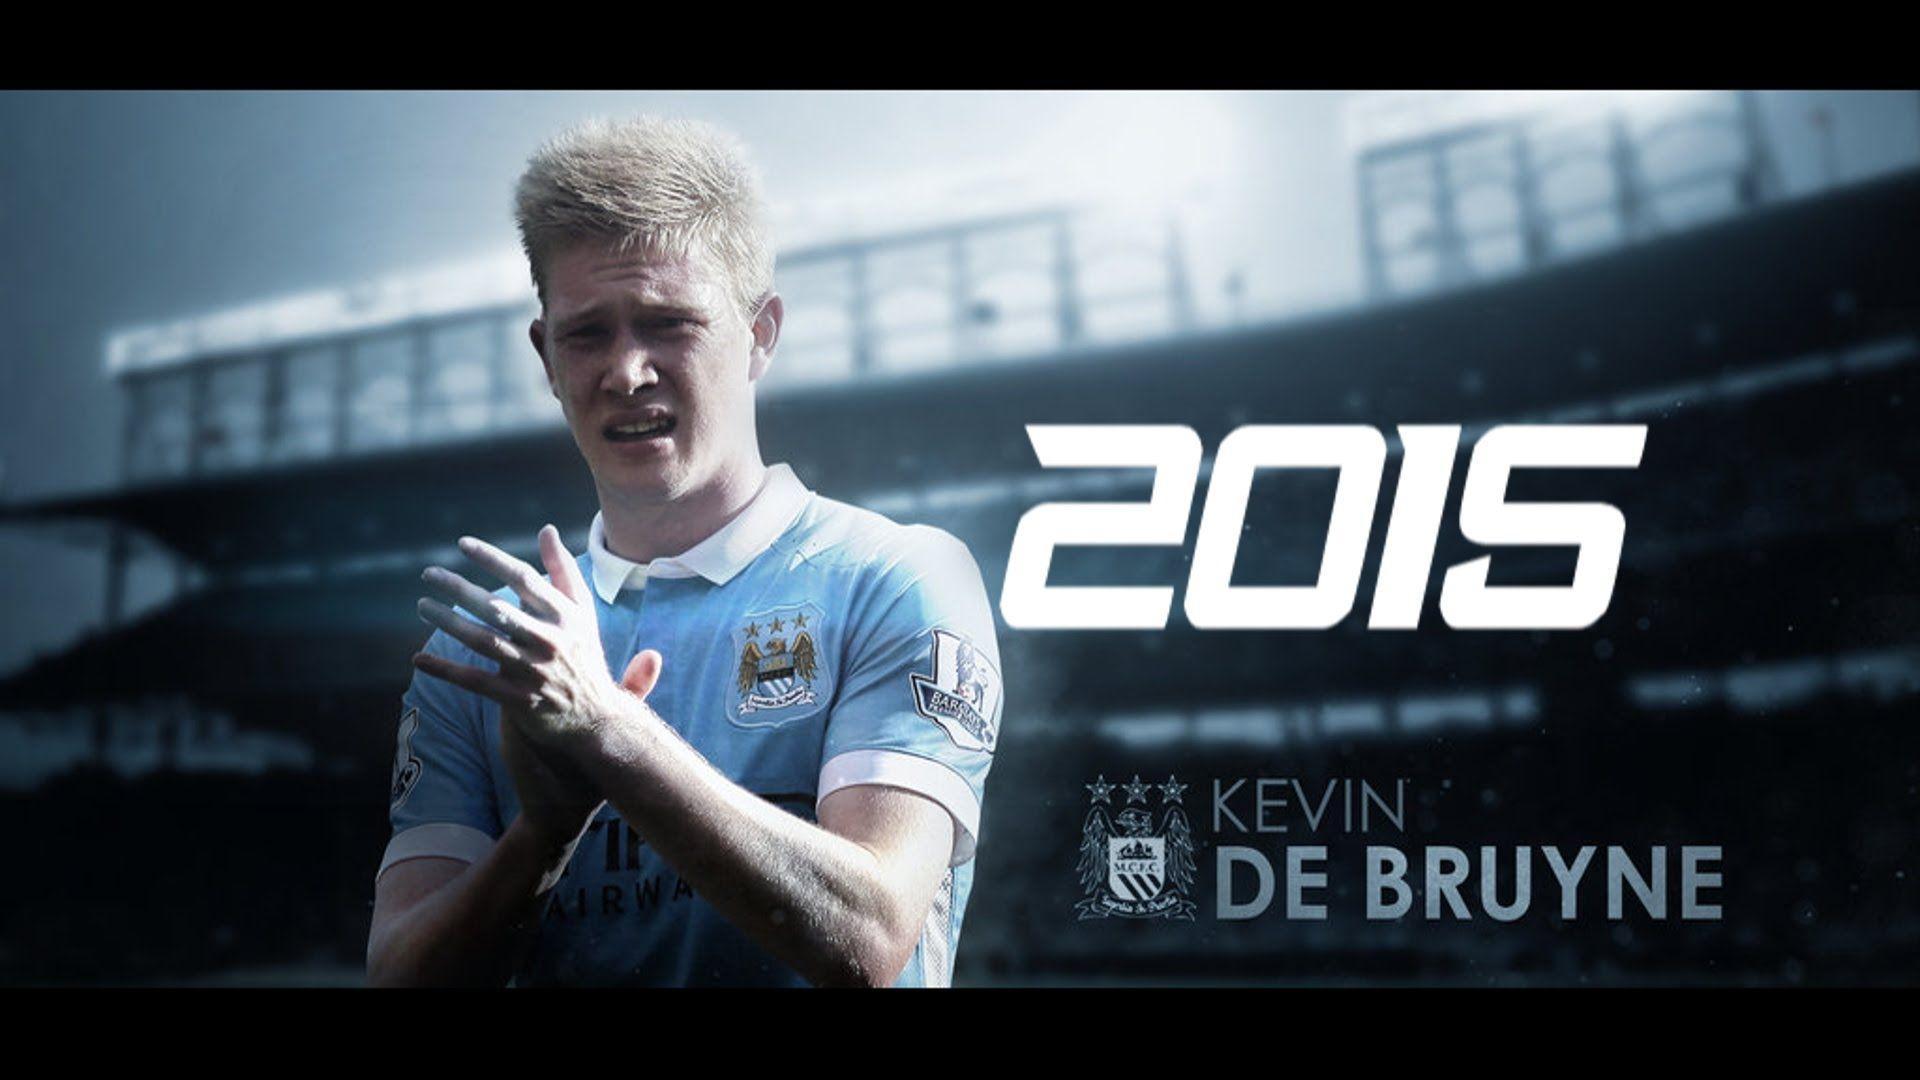 Kevin De Bruyne Wallpaper Wallpaper Background of Your Choice